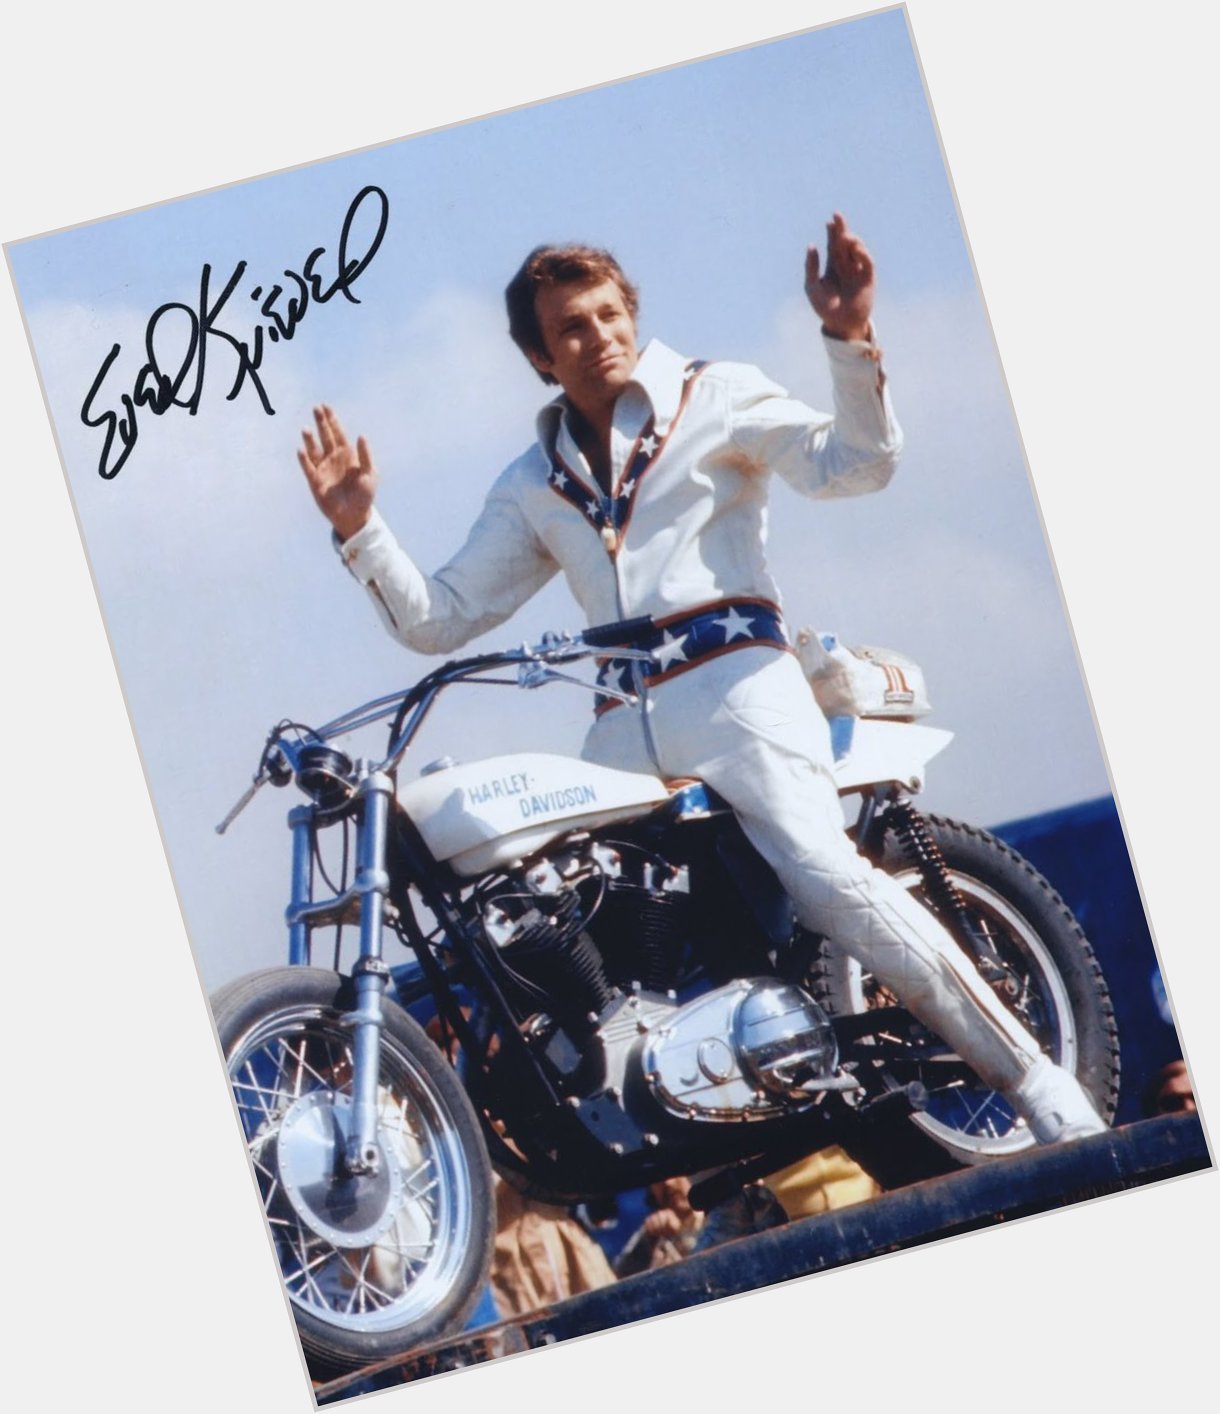 Happy Birthday to Evel Knievel who would have turned 79 today! 